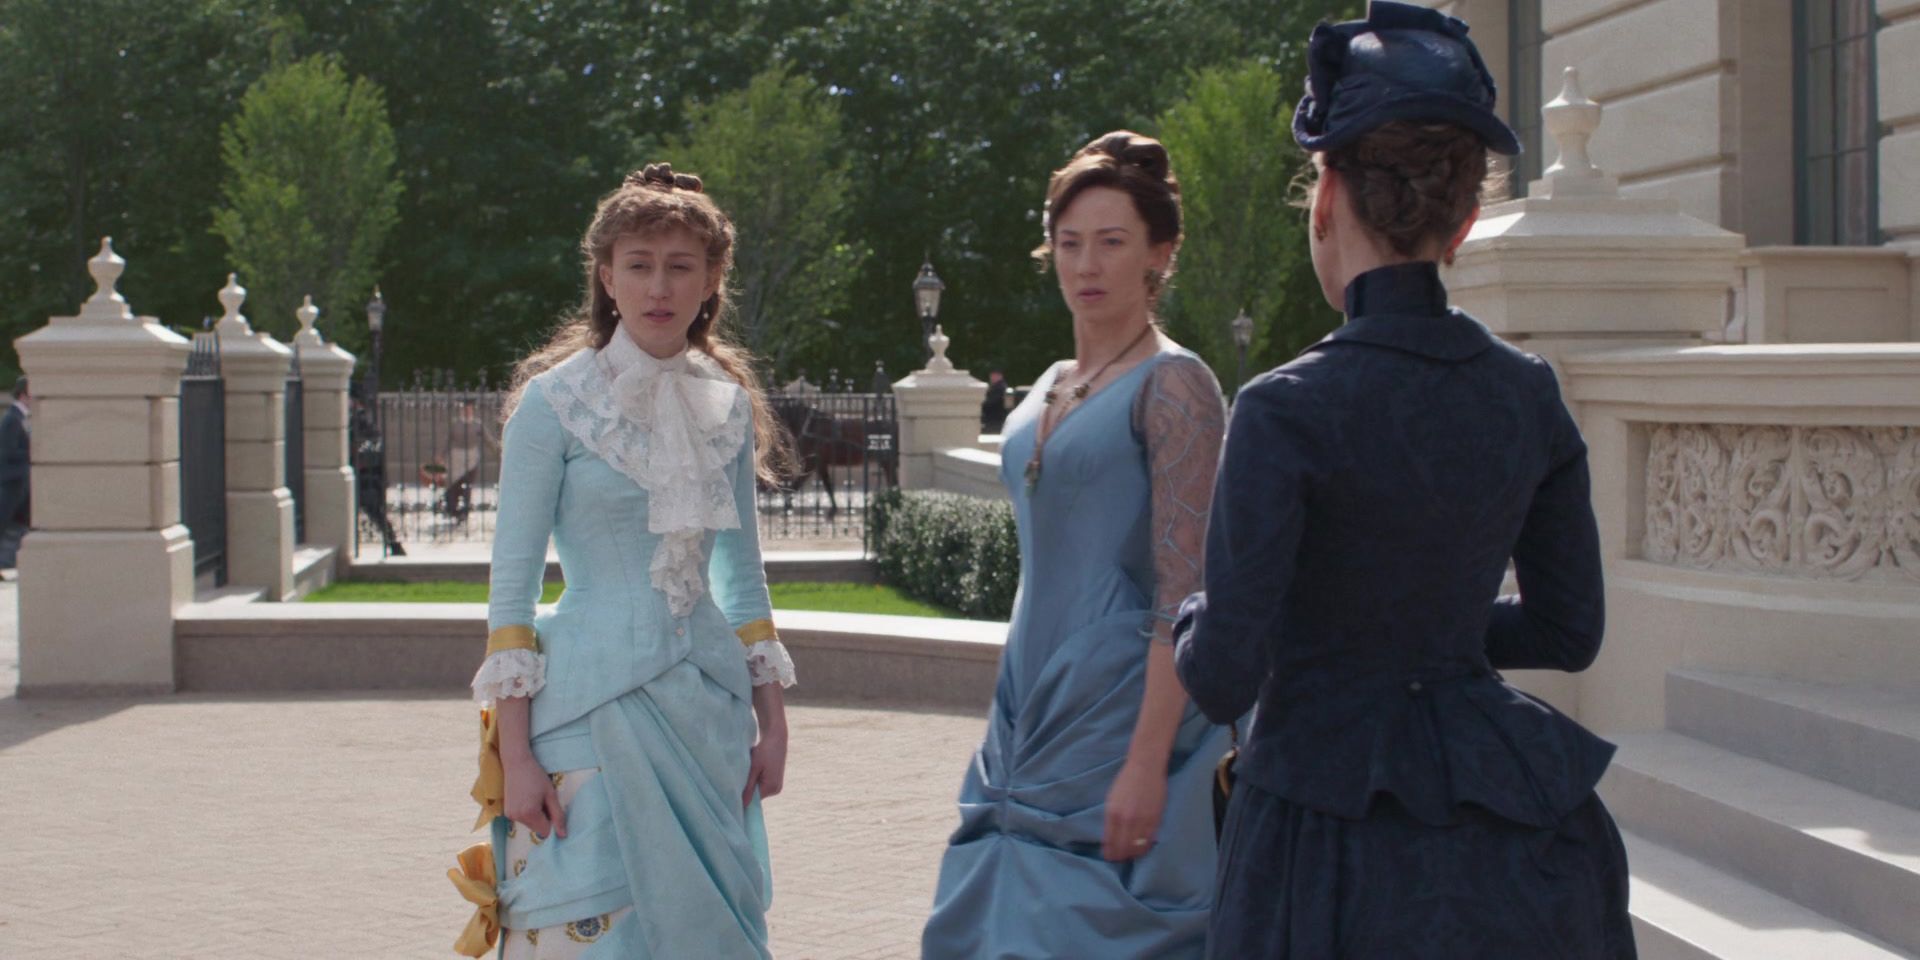 Taissa Farmiga as Gladys in The Gilded Age. She's wearing a blue dress with white embellishments and standing near other women